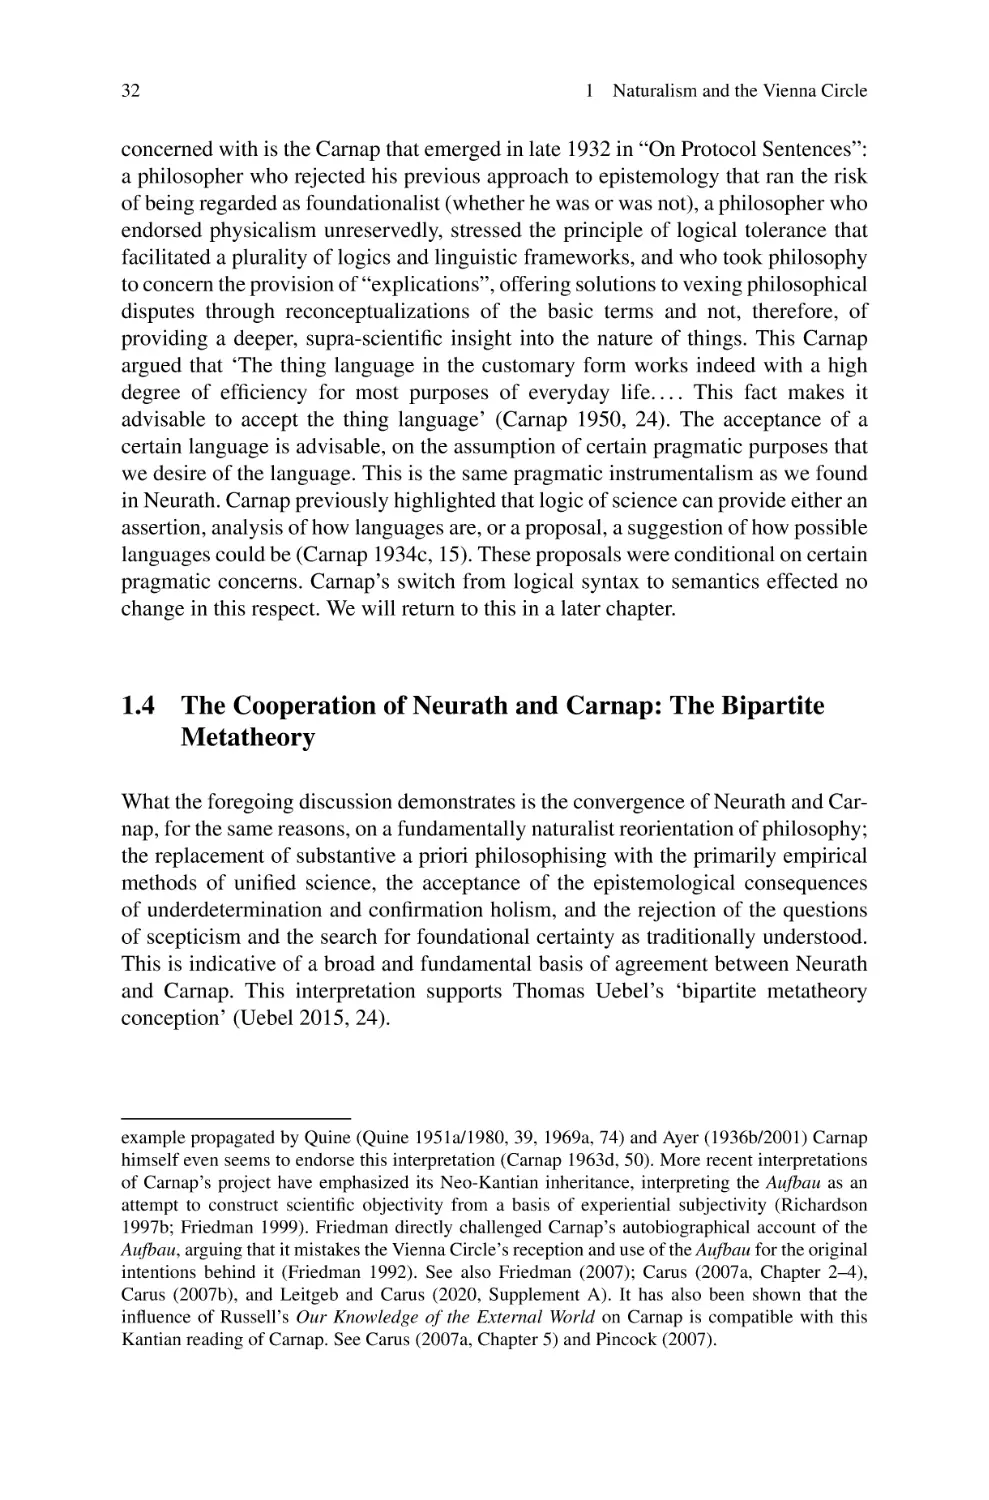 1.4 The Cooperation of Neurath and Carnap